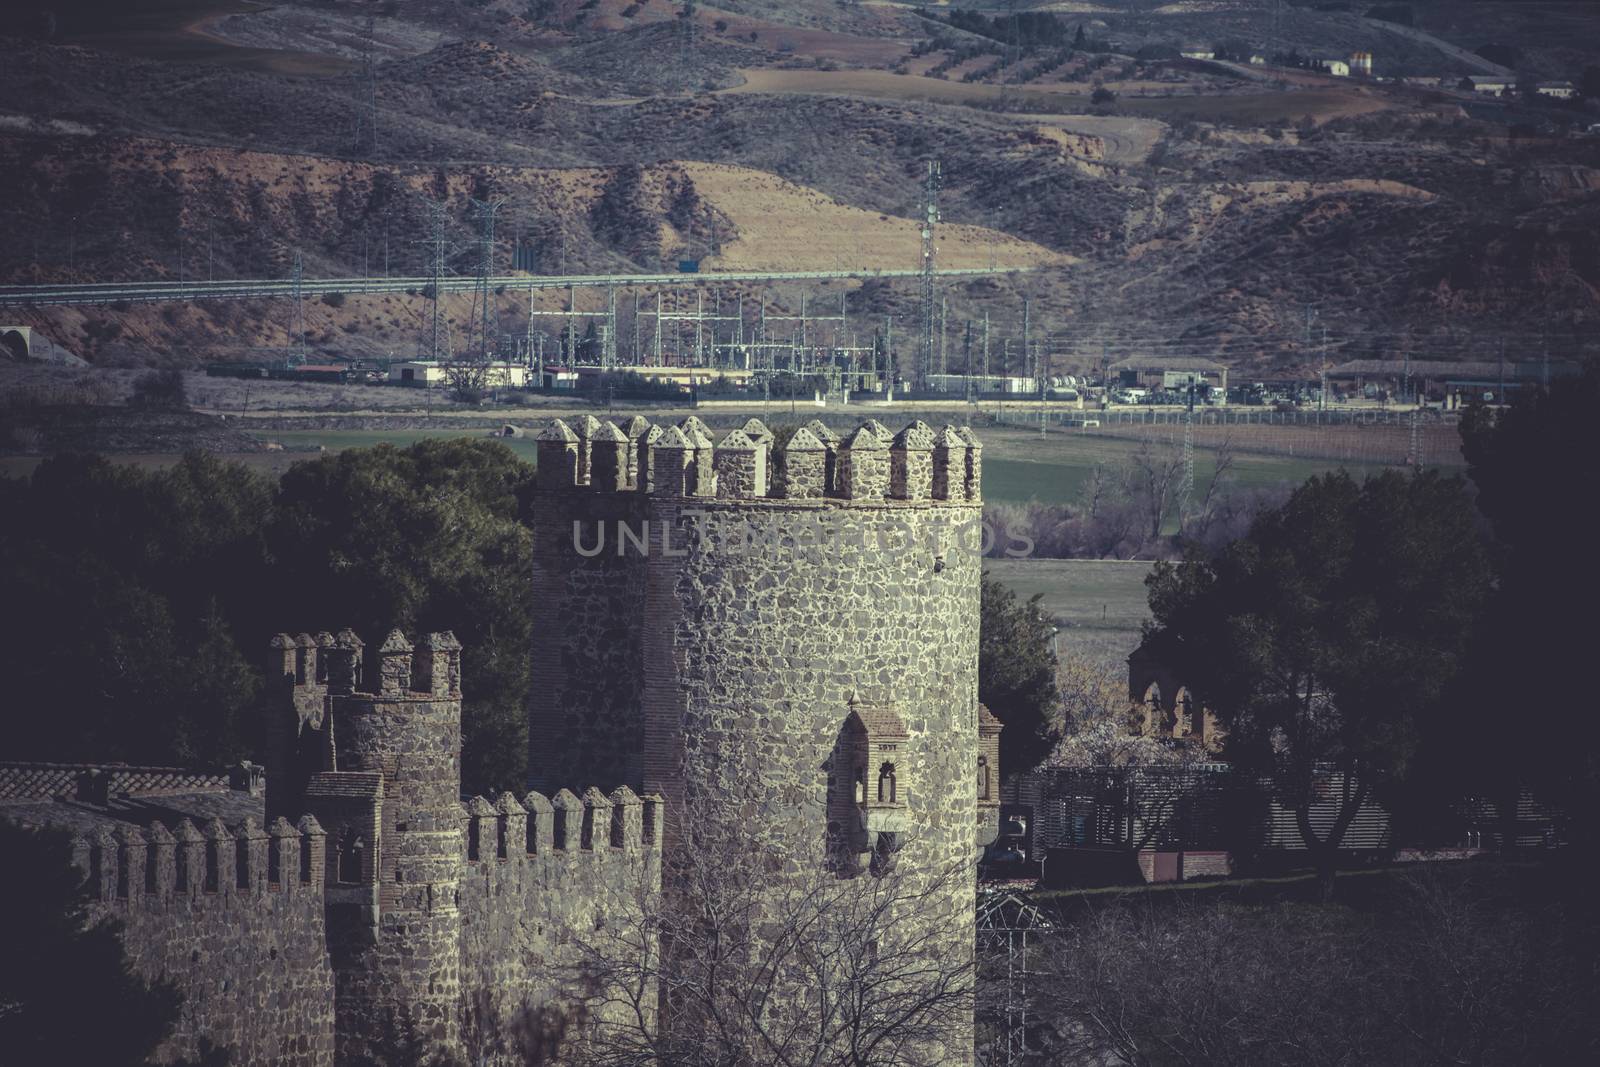 City wall of Toledo, Spanish imperial city famous for its huge h by FernandoCortes